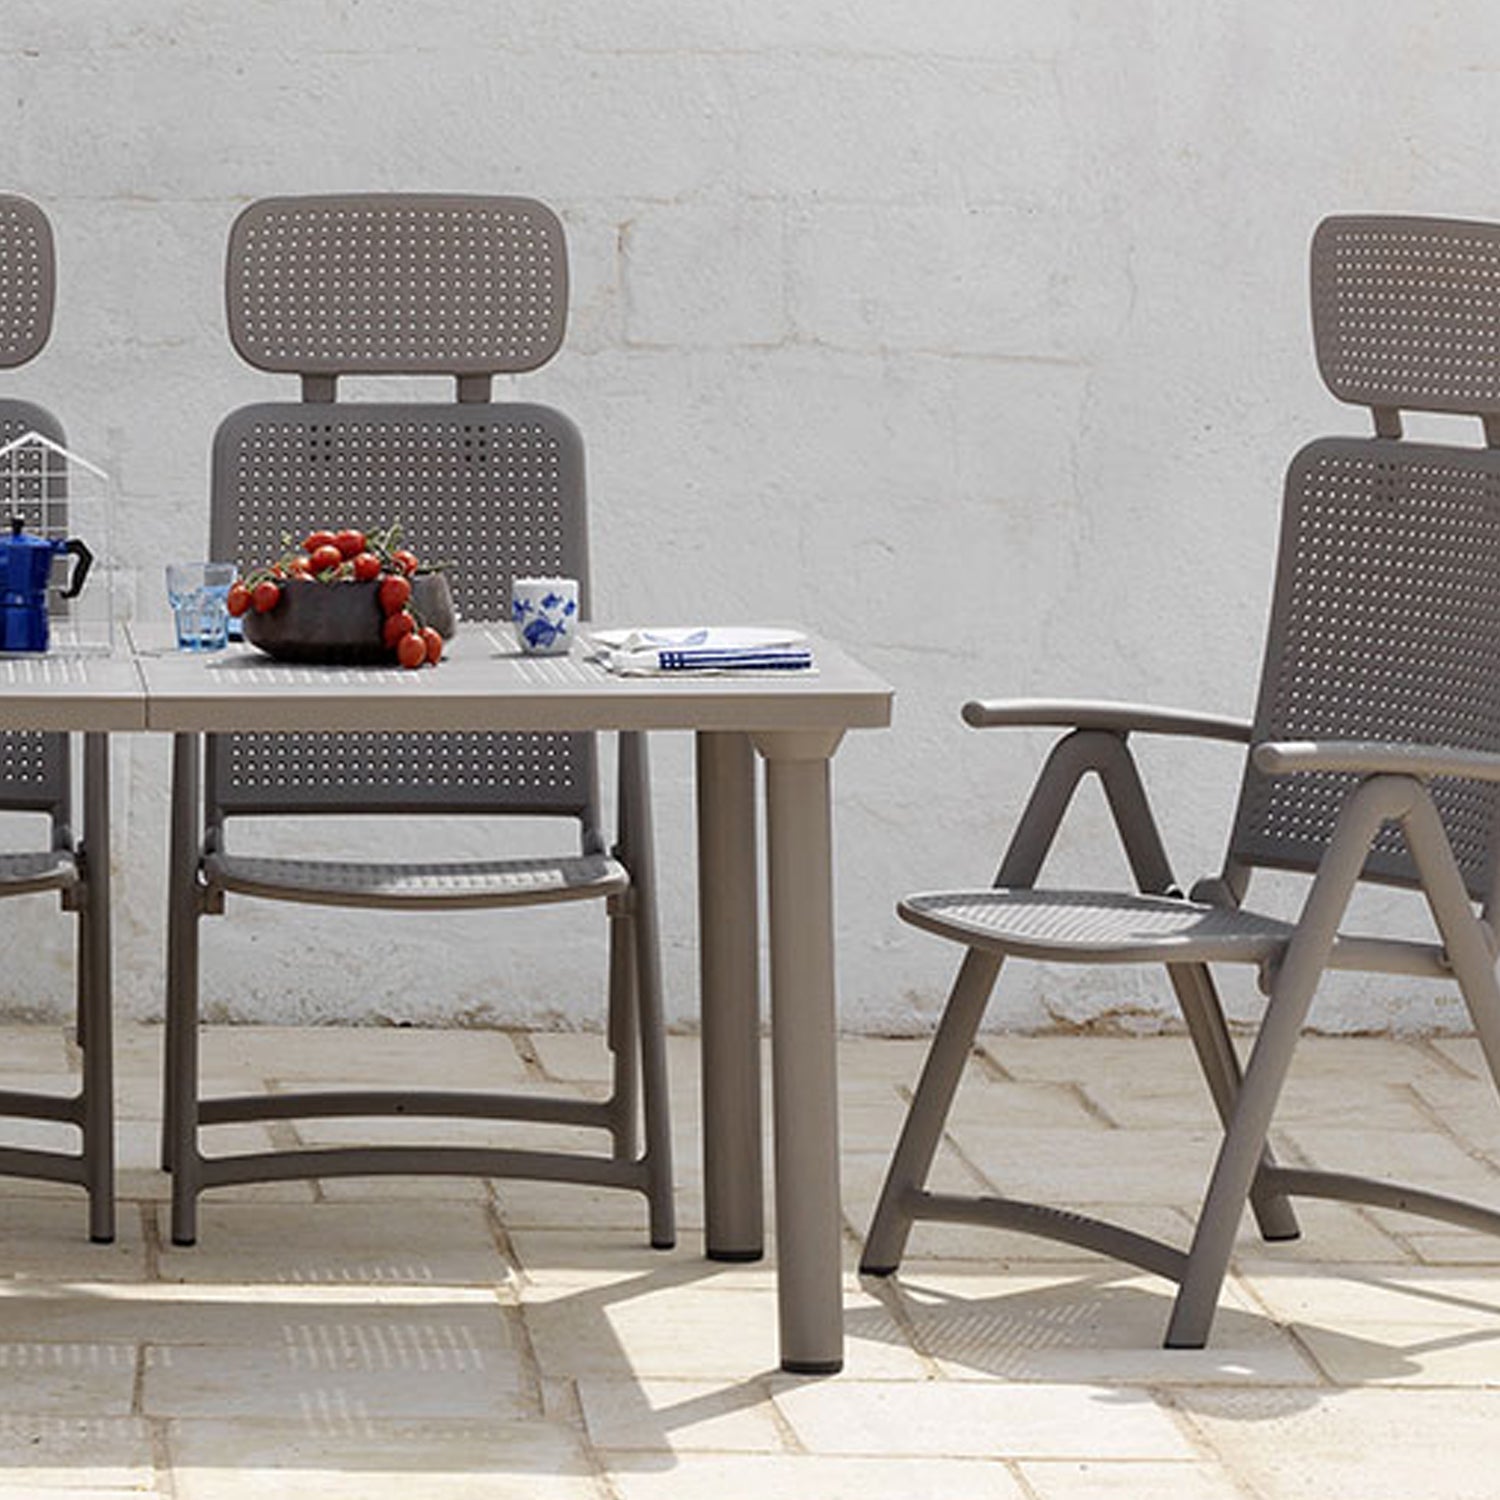 Luxury Outdoor Dining By Nardi